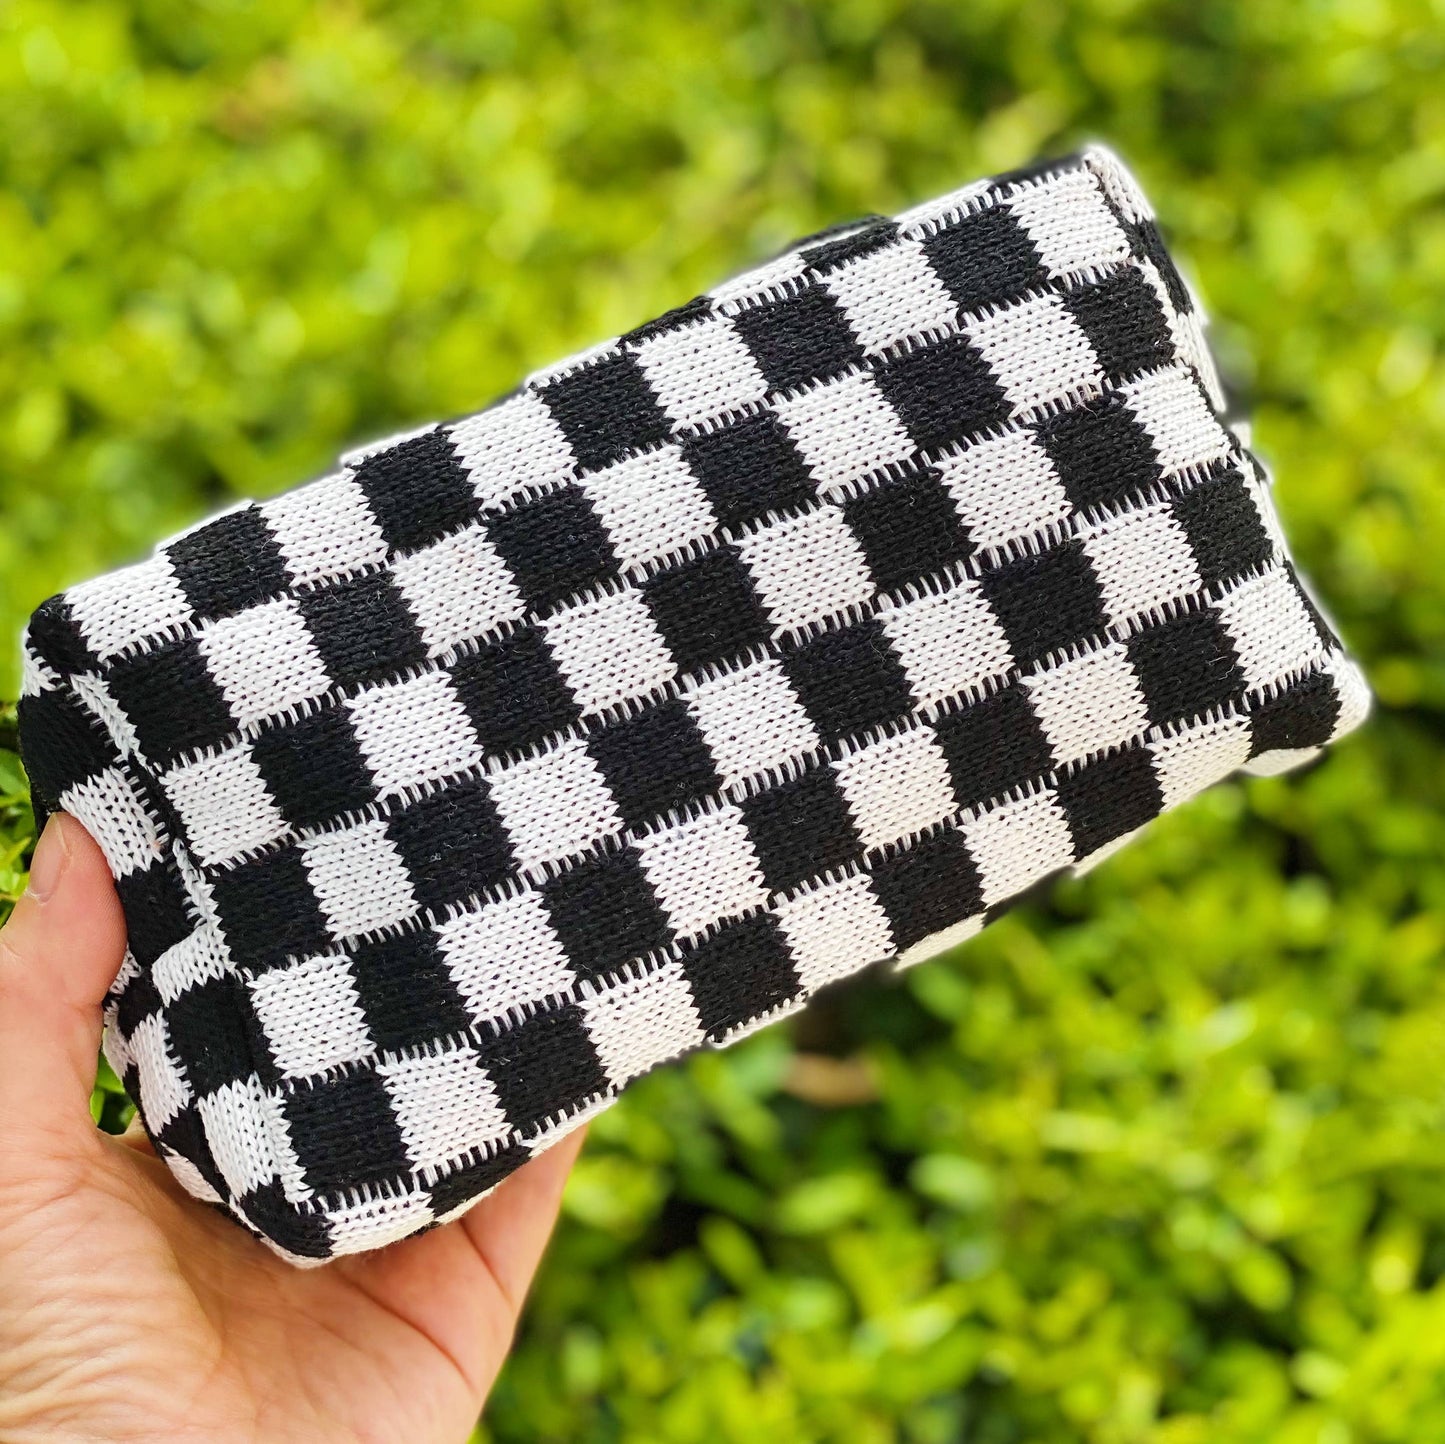 Black & White Check Yourself Cosmetic Bag